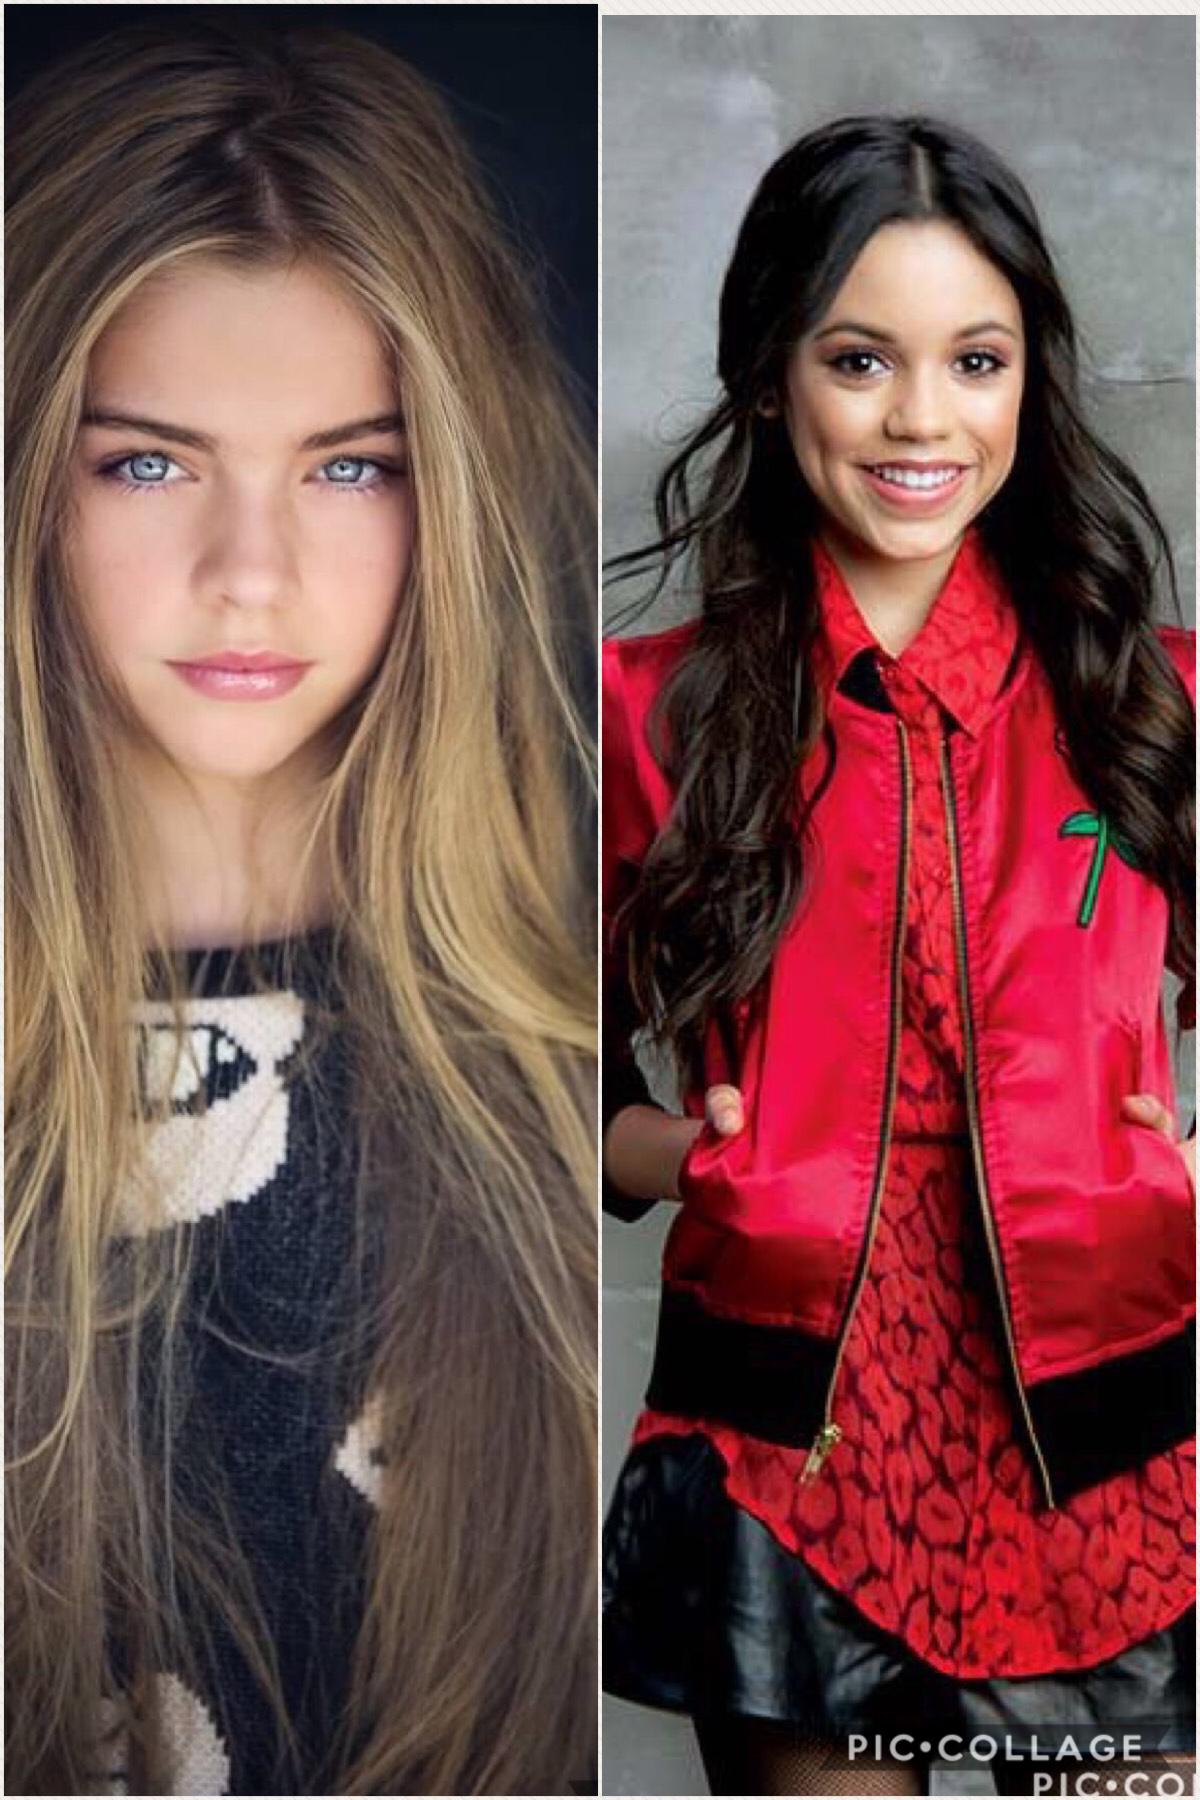 Jade weber is an actress and a model Jenna ortaga is a actress and plays the voice of Alena of avalor 